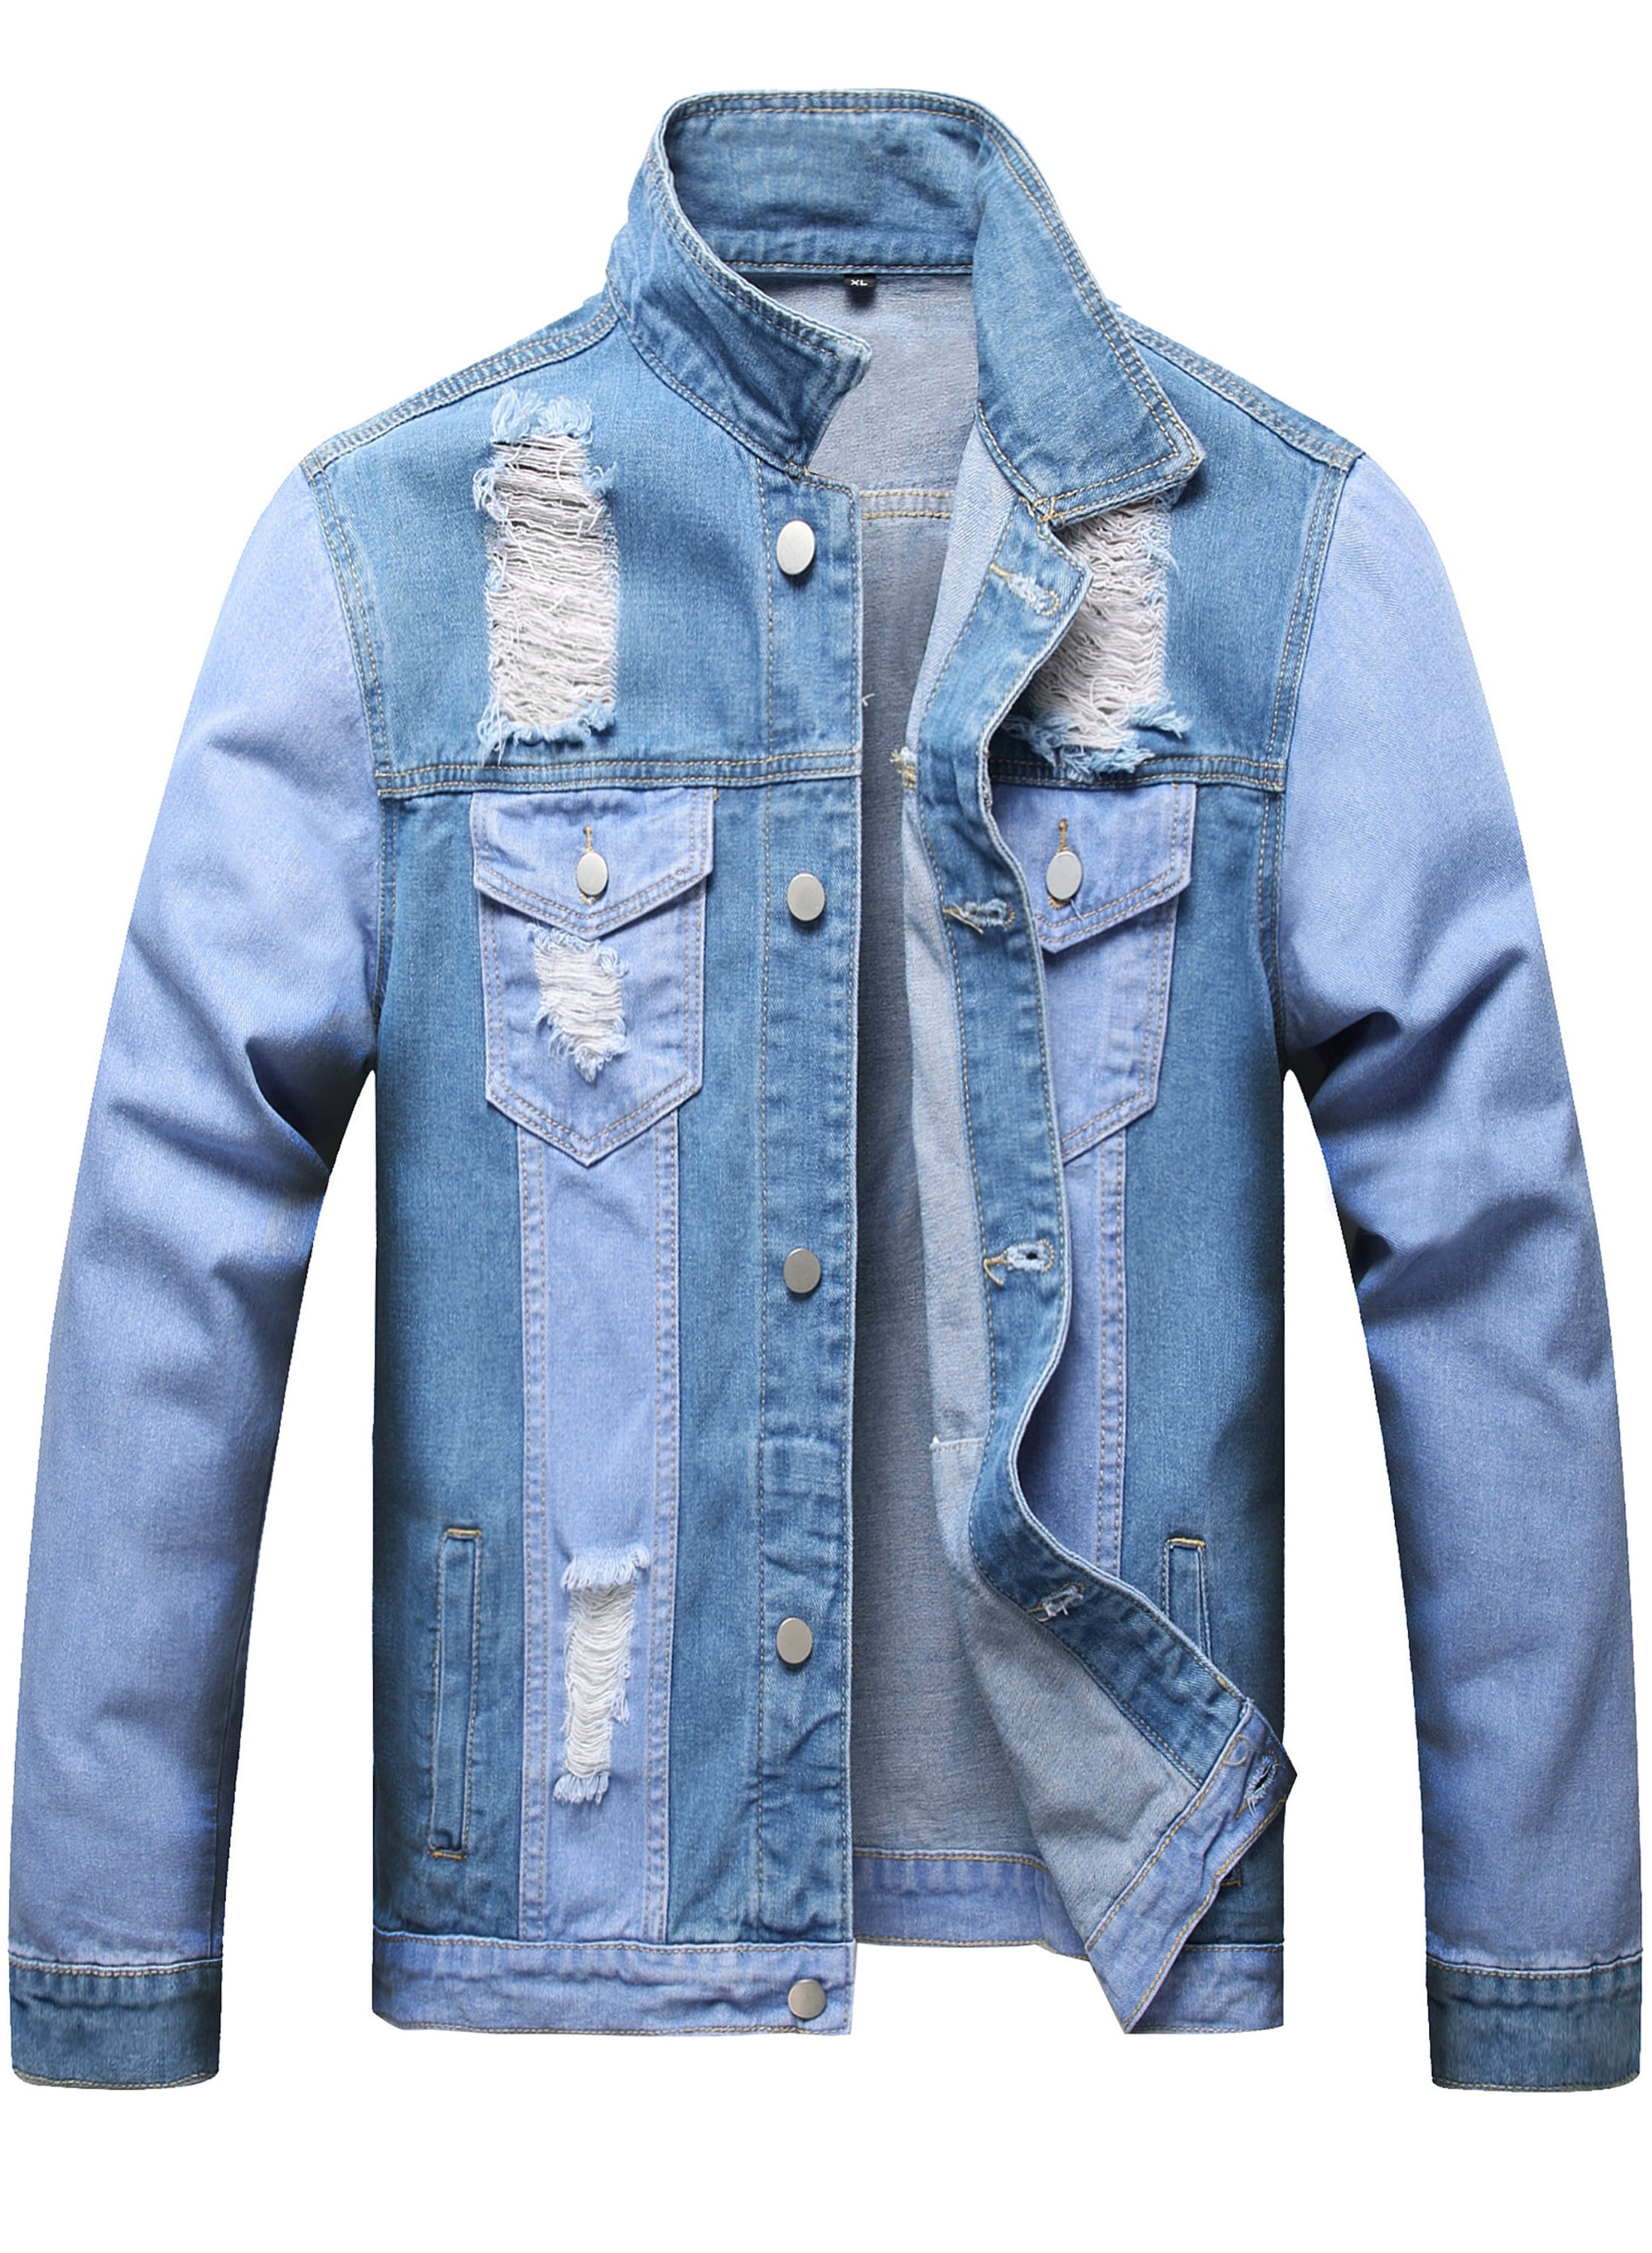 LZLER Jean Jacket for Men, Classic Ripped Slim Denim Jacket with